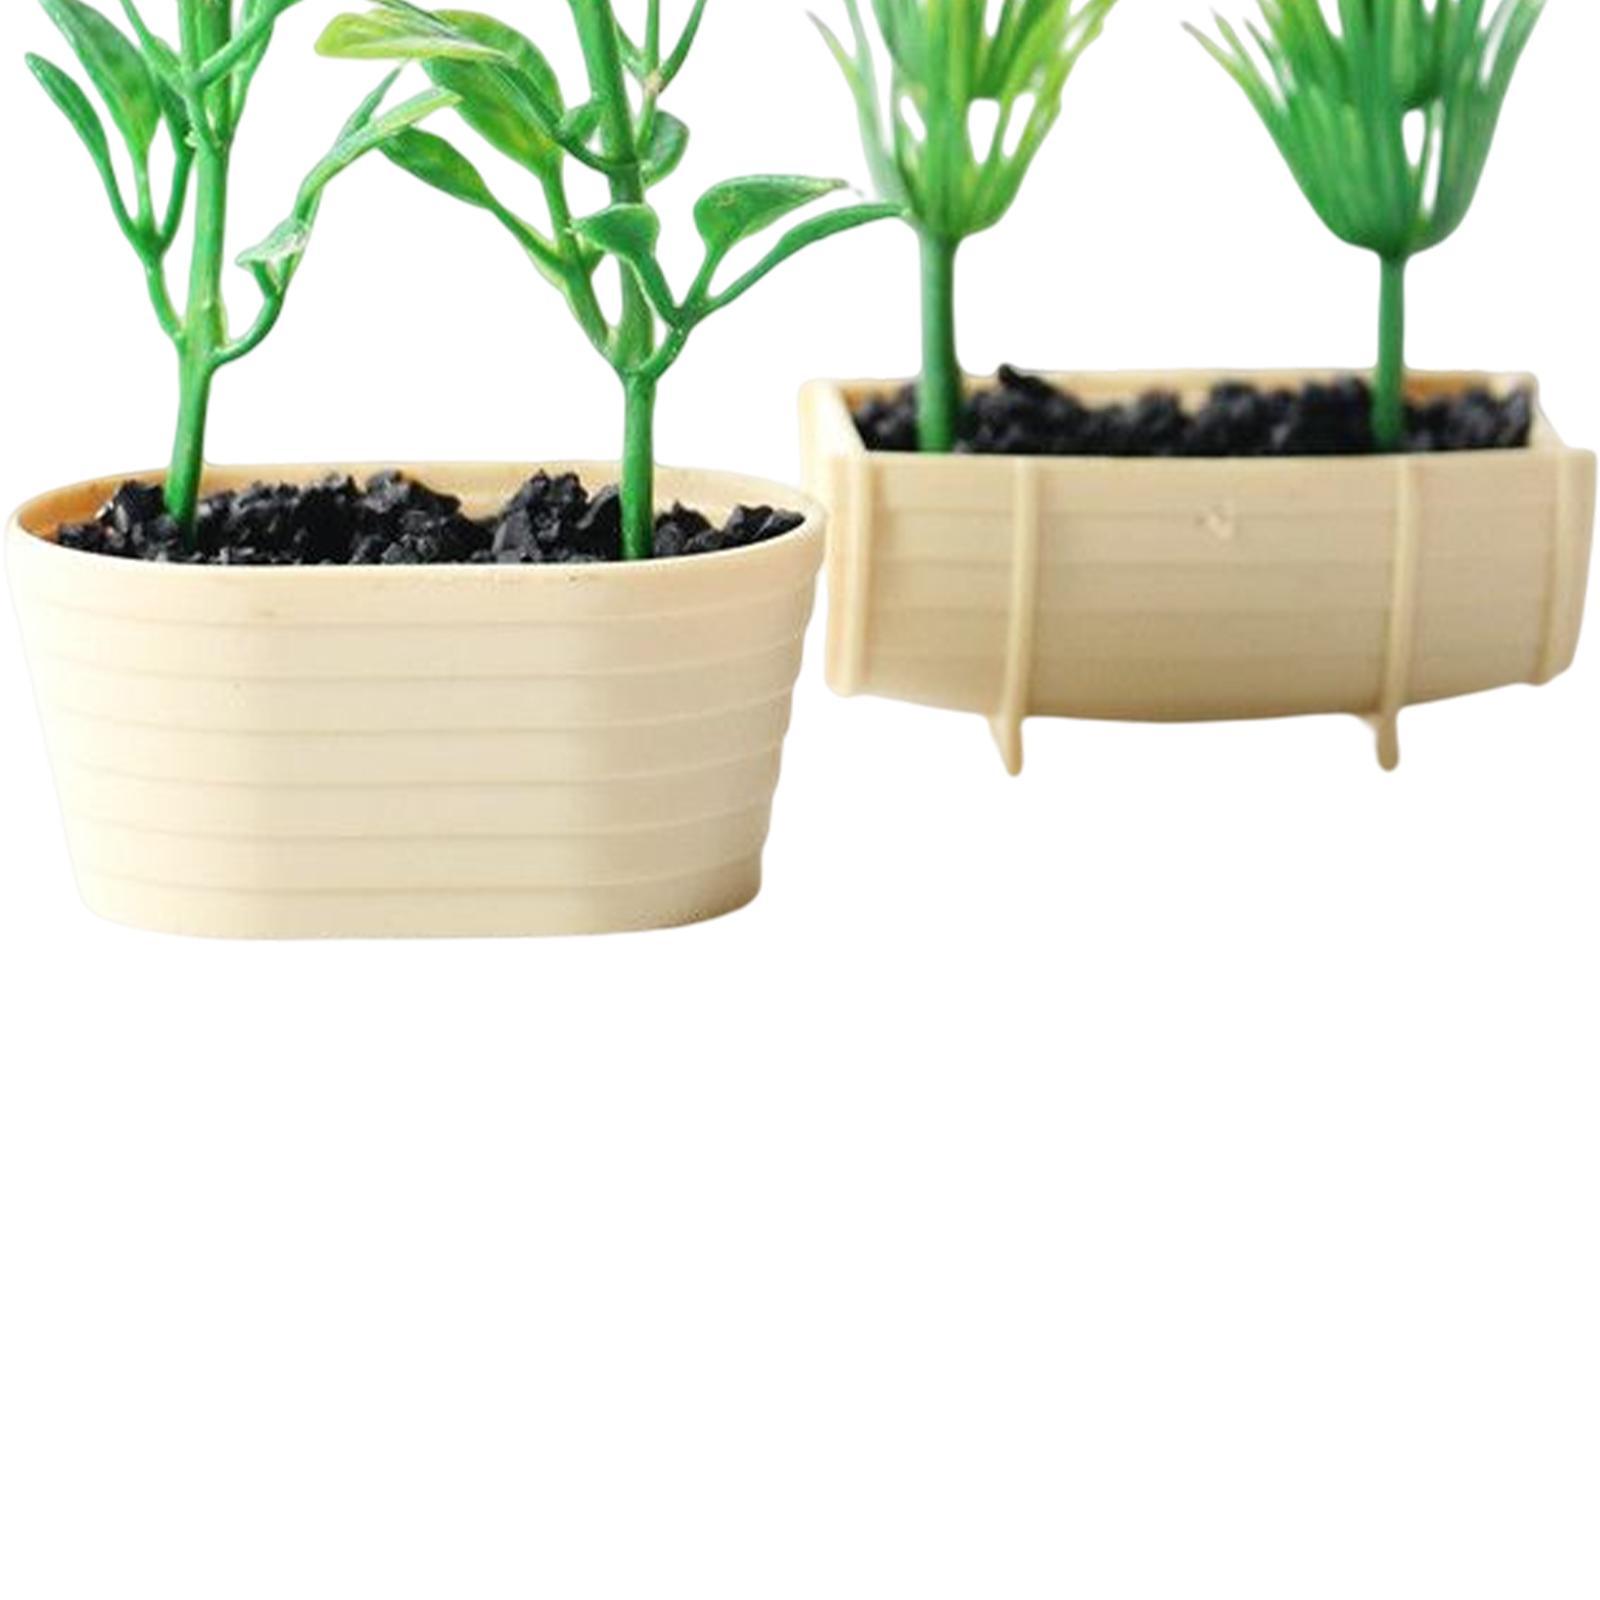 2 Pieces Dollhouse Plants Tiny Fake Greenery for Mini House Model Micro Landscape